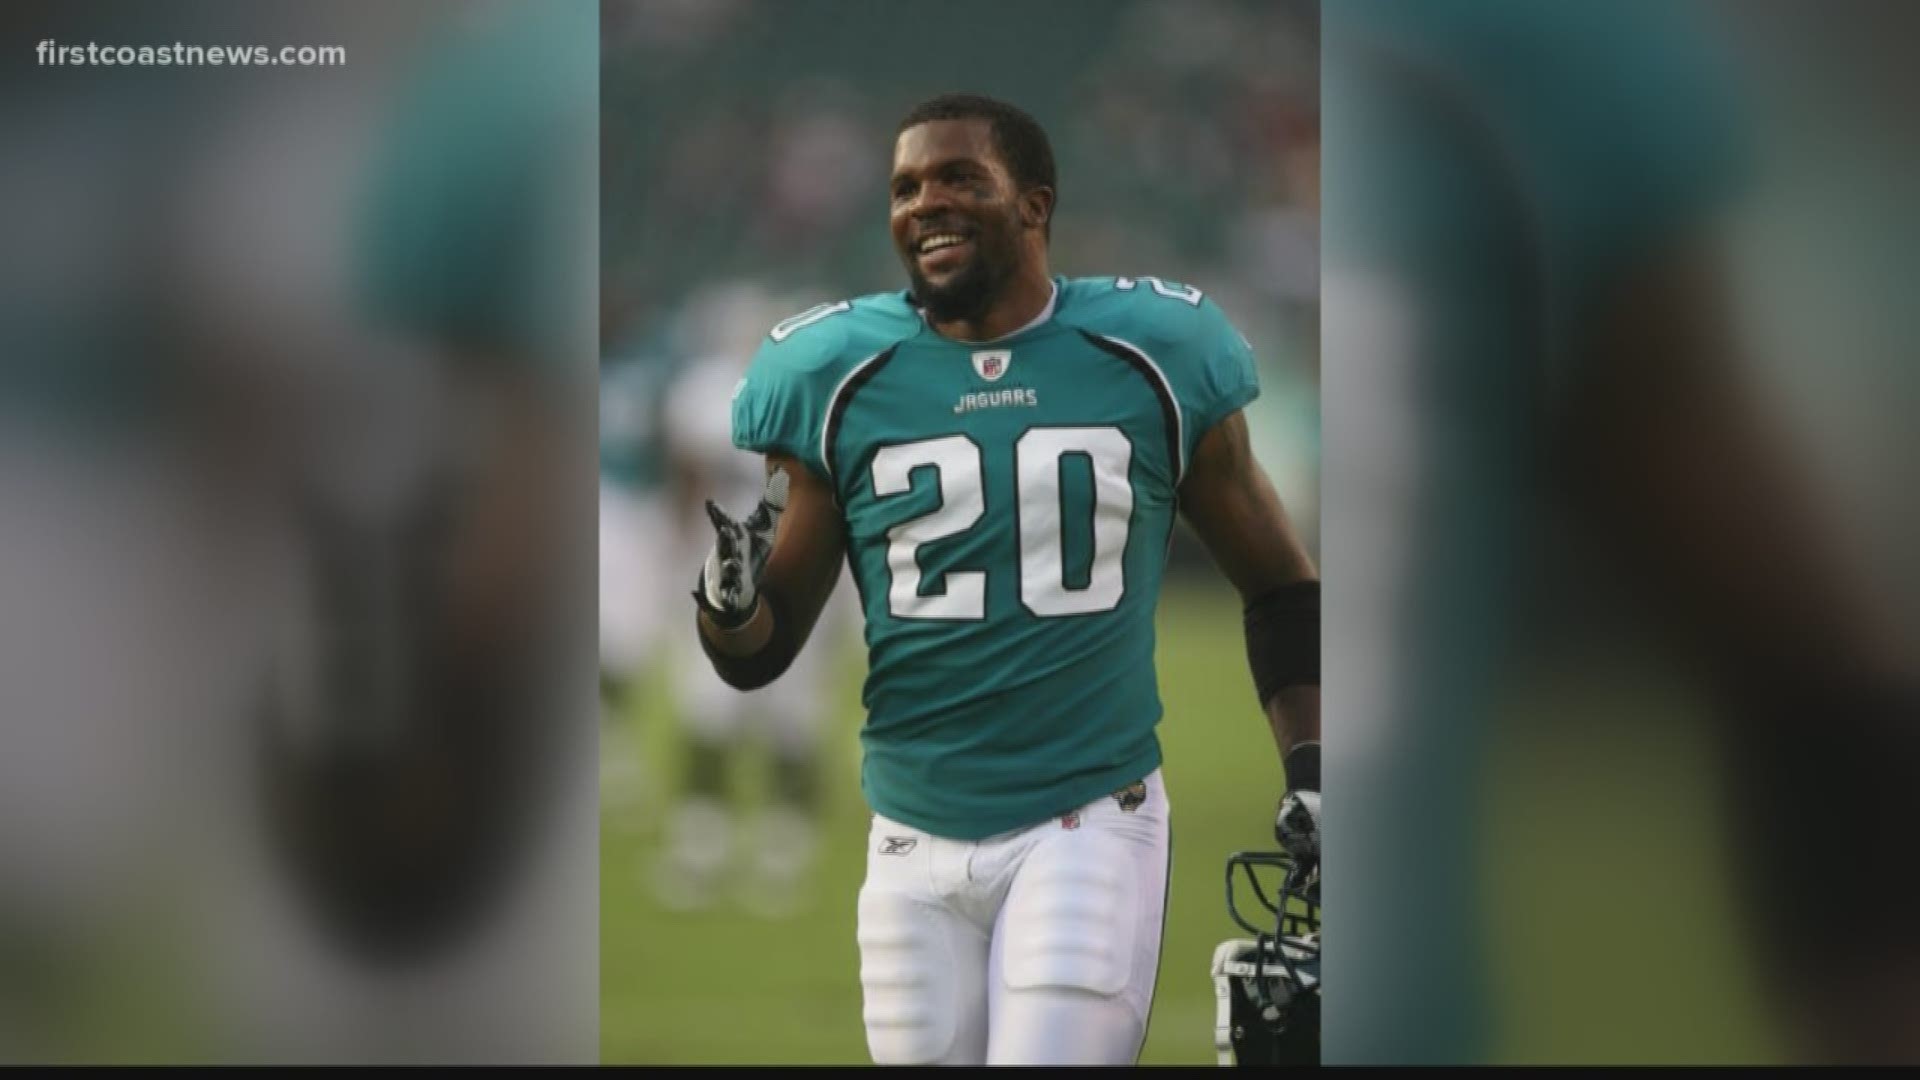 Former Jacksonville Jaguar and assistant coach Marlon Tarron McCree is facing 30 years in prison after he was arrested Monday for insurance fraud totally near $78,000.